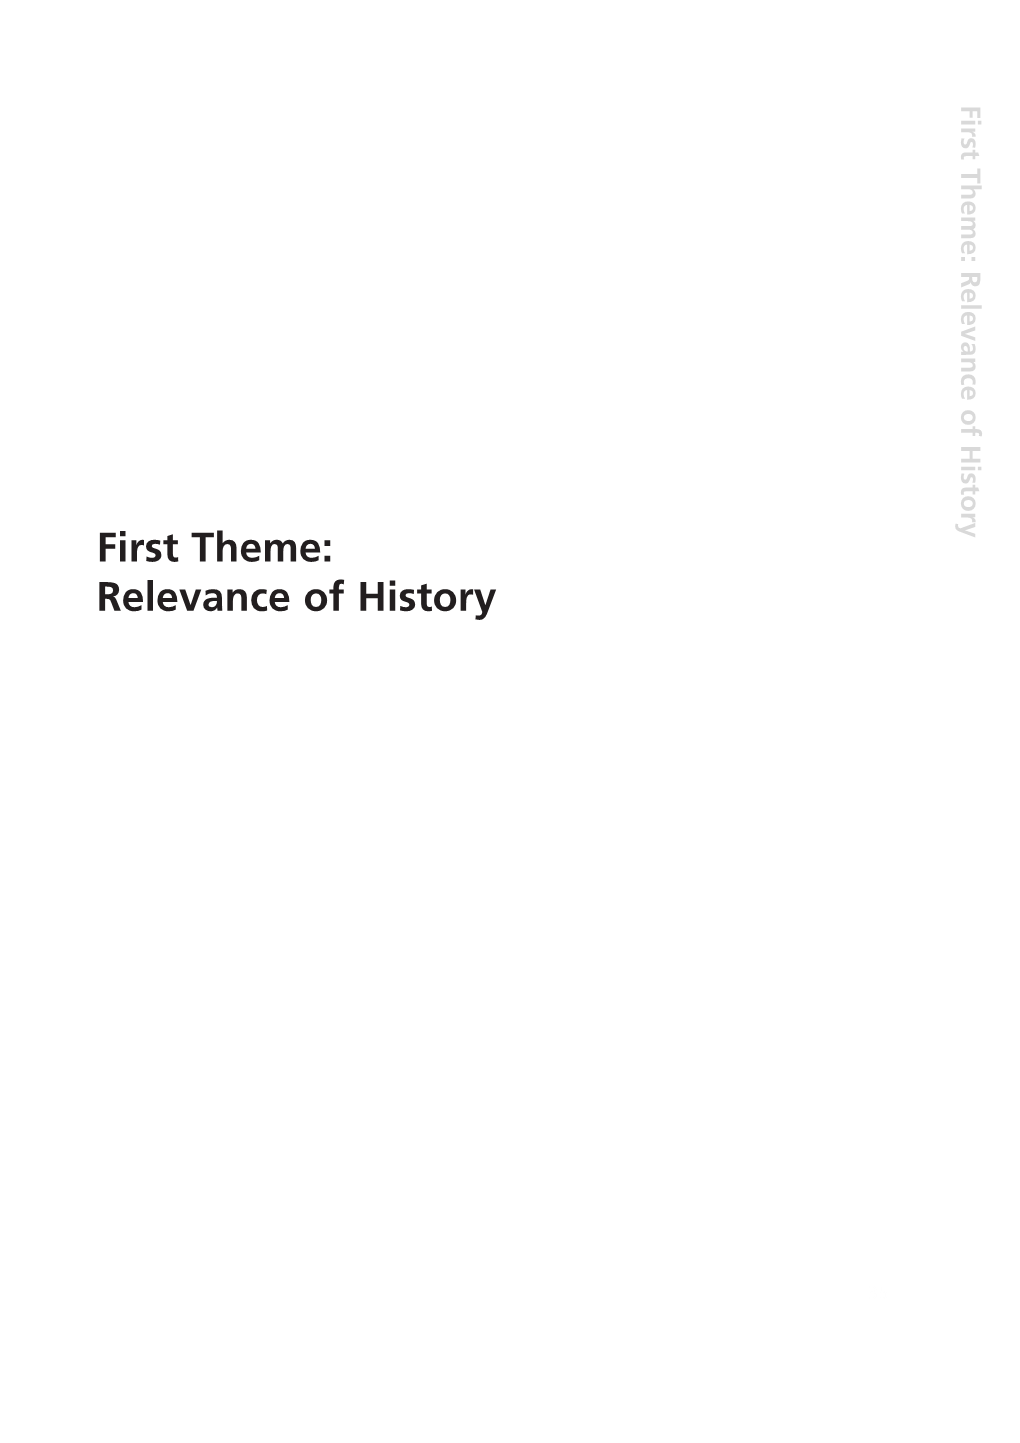 First Theme: Relevance of History